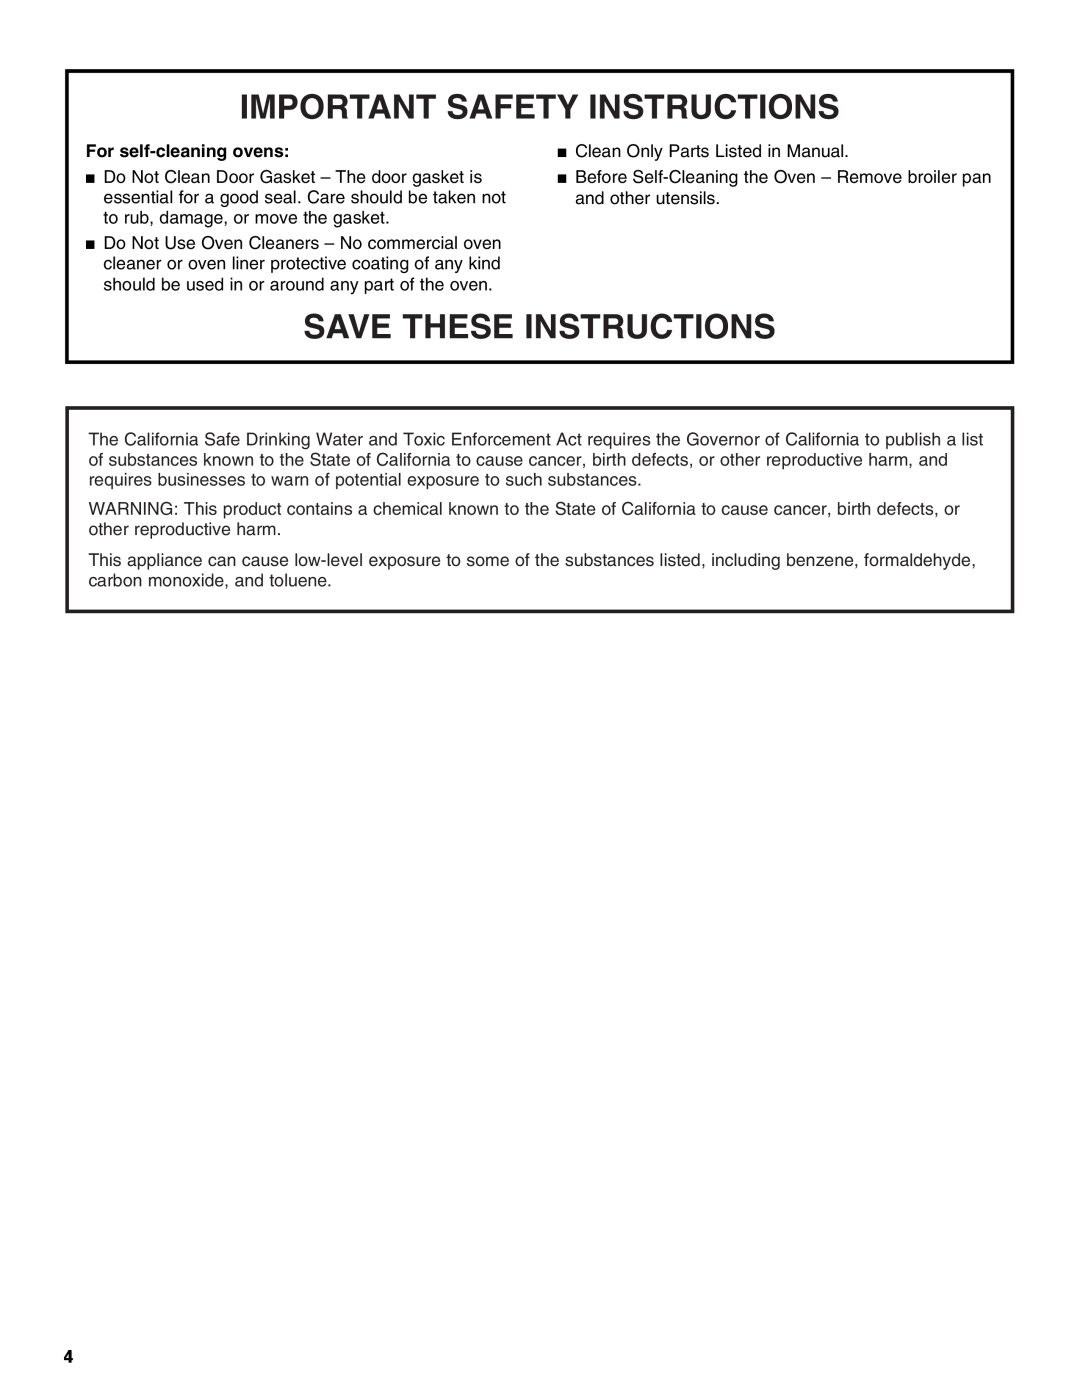 Whirlpool RBD276, YRBS305, YRBS275, RBS245 For self-cleaning ovens, Important Safety Instructions, Save These Instructions 